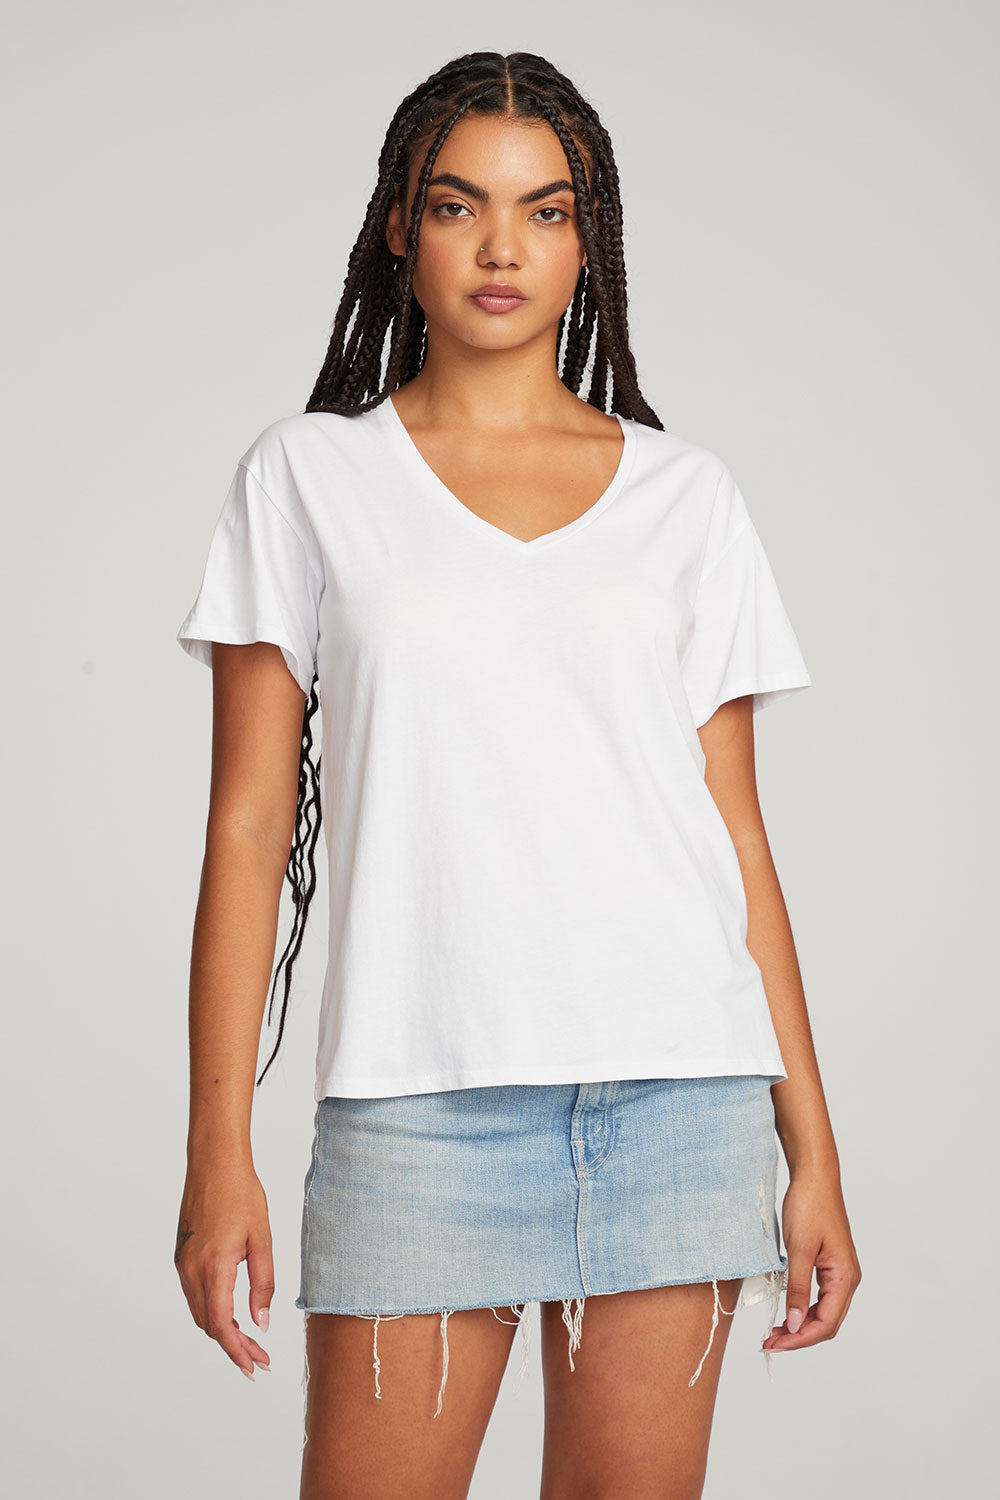 Everyday Essential White V-neck Tee WOMENS chaserbrand